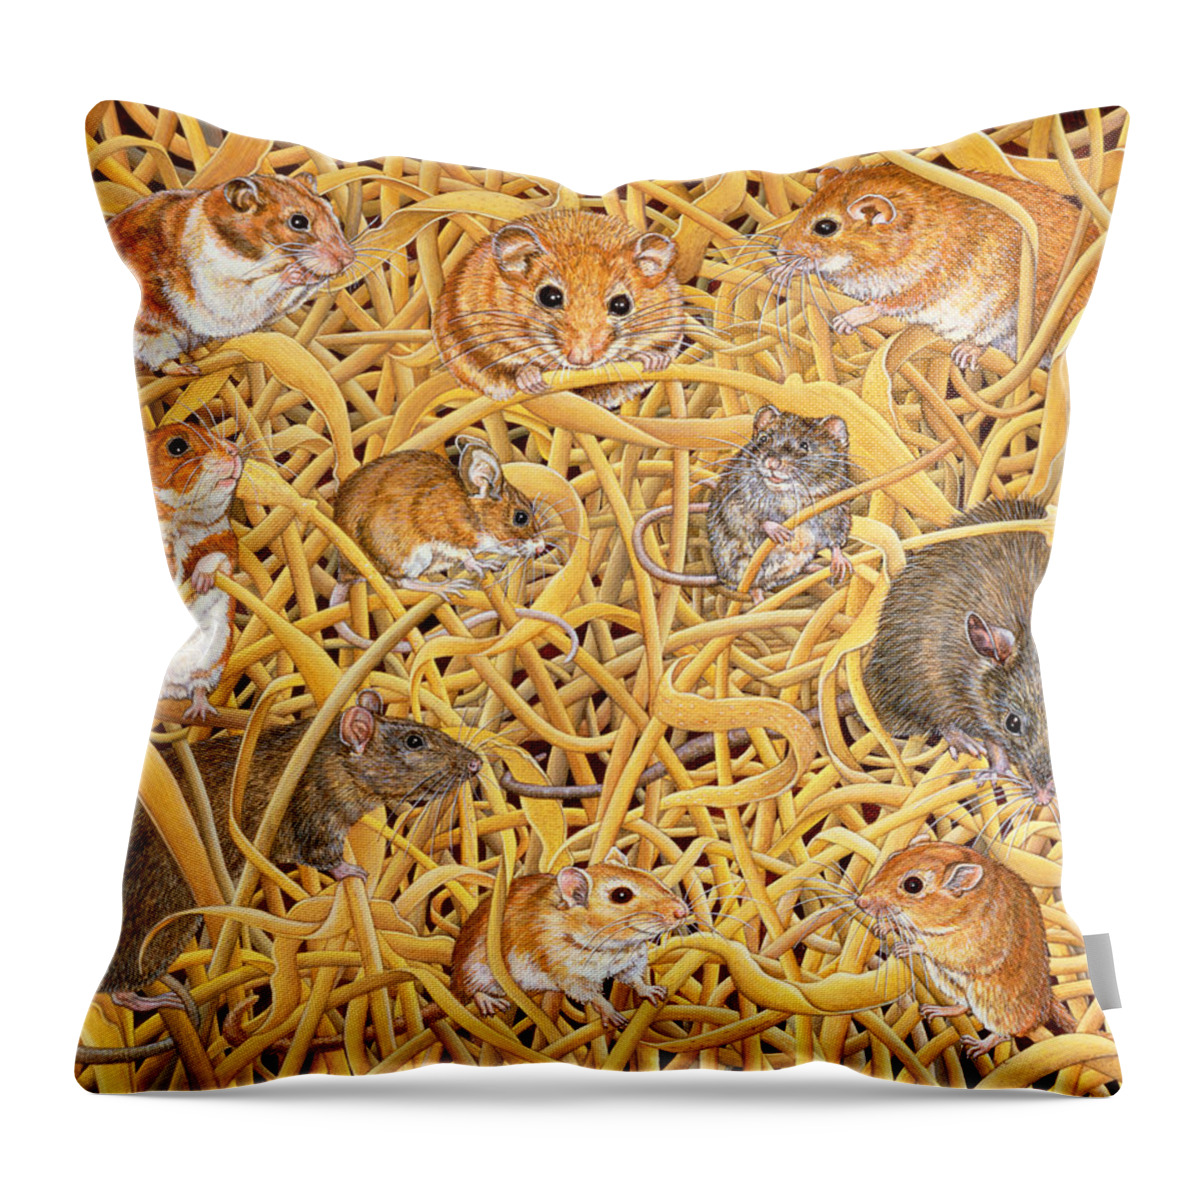 Harvest Mice Throw Pillow featuring the painting The Raiders of the Ark by Ditz